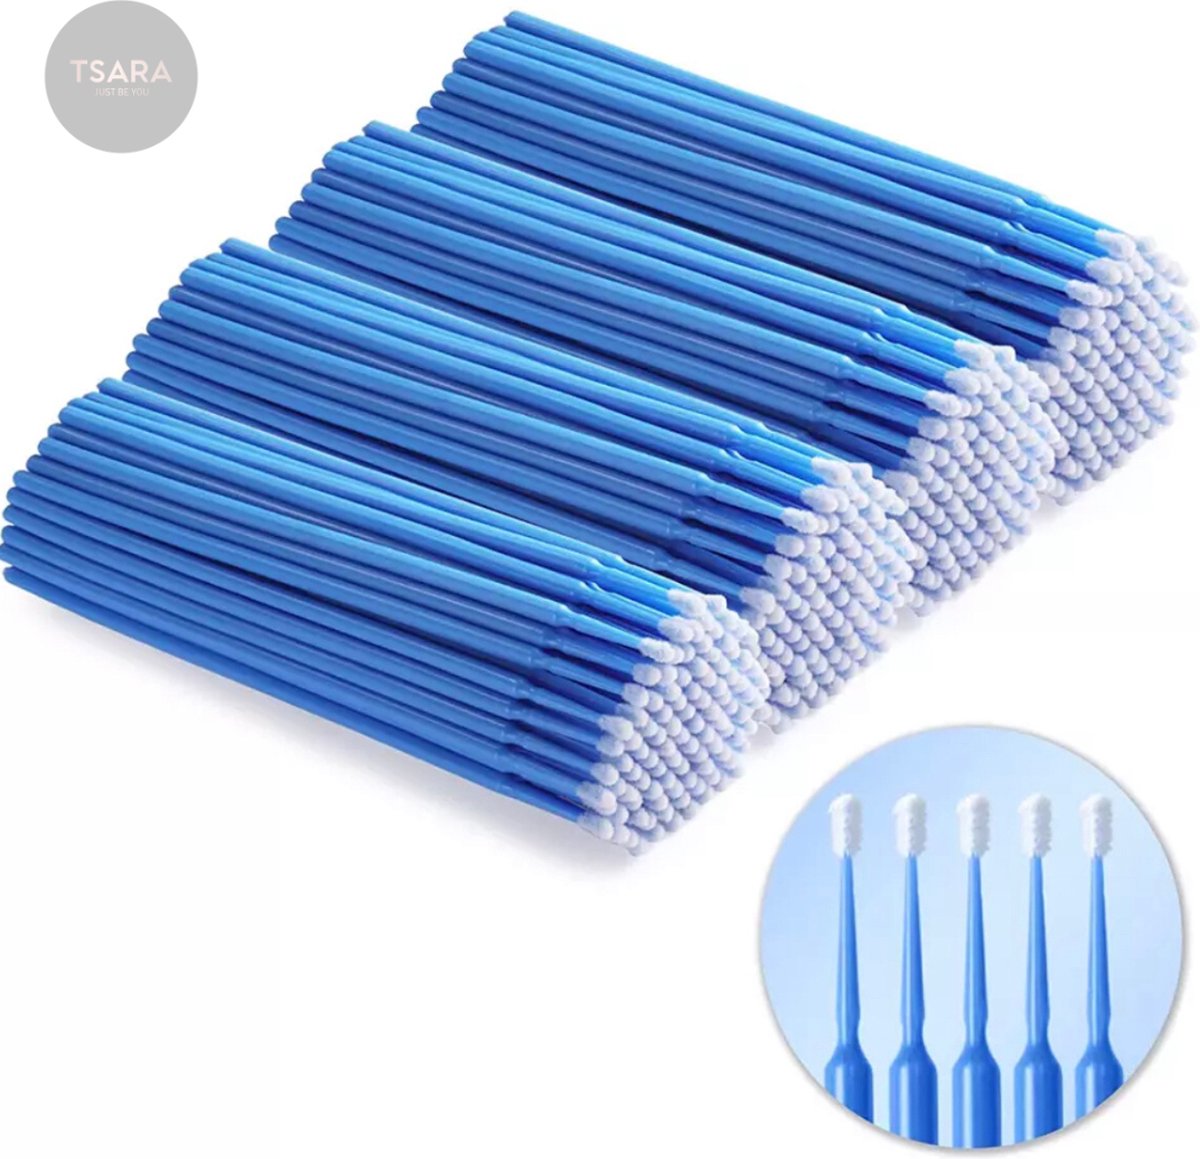 Microbrush Blauw - Wimper Extensions - Lash product